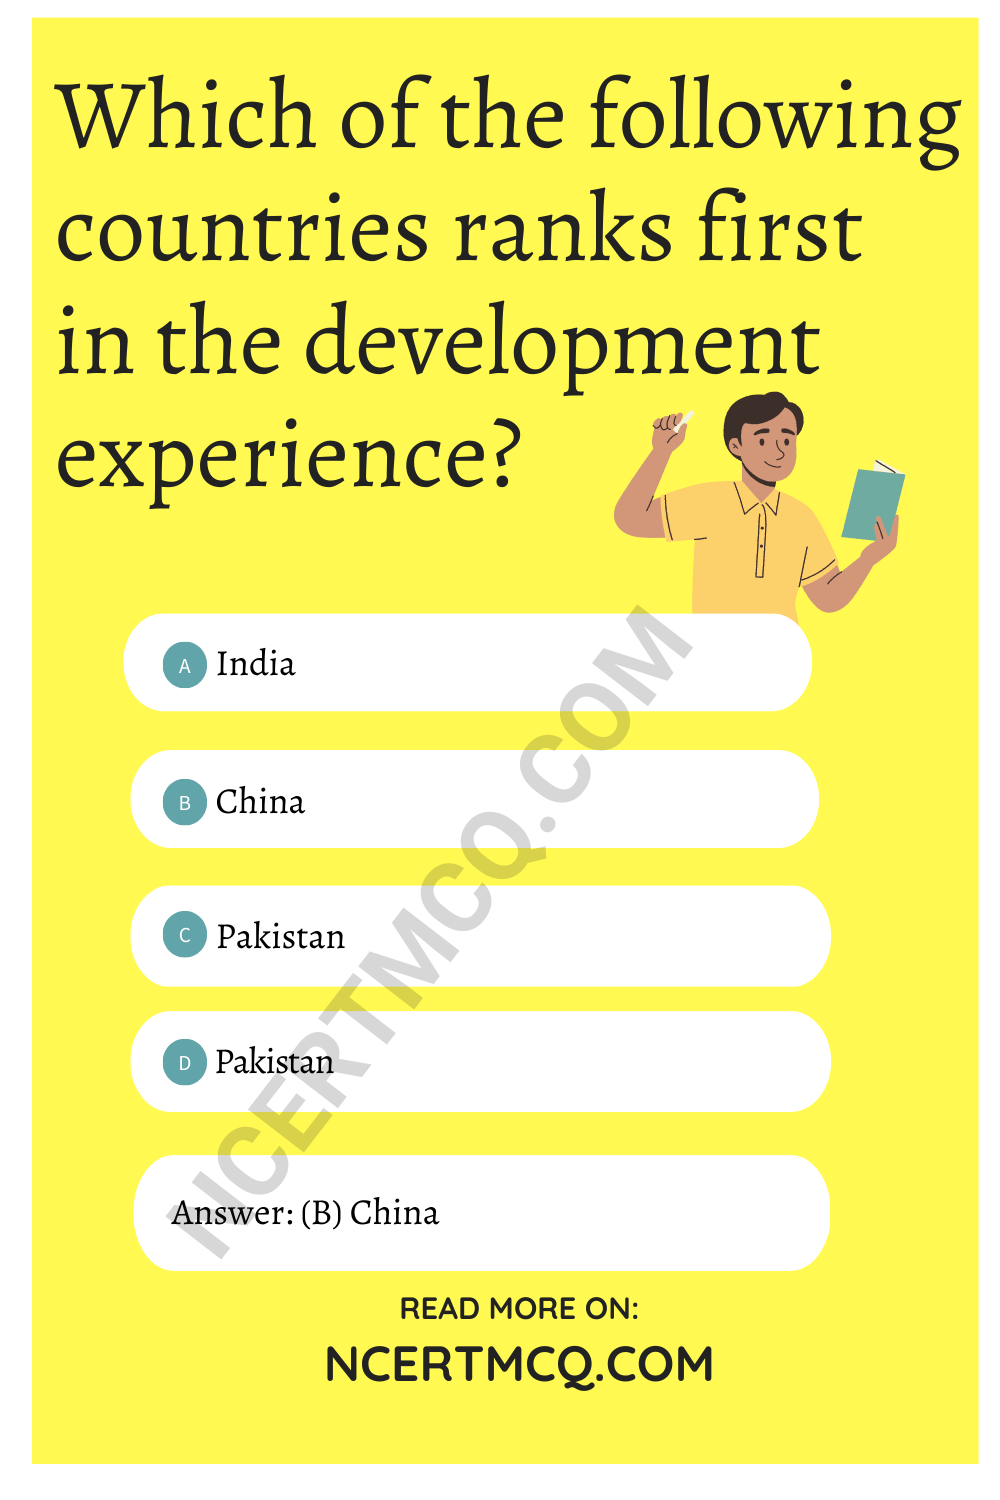 Which of the following countries ranks first in the development experience?